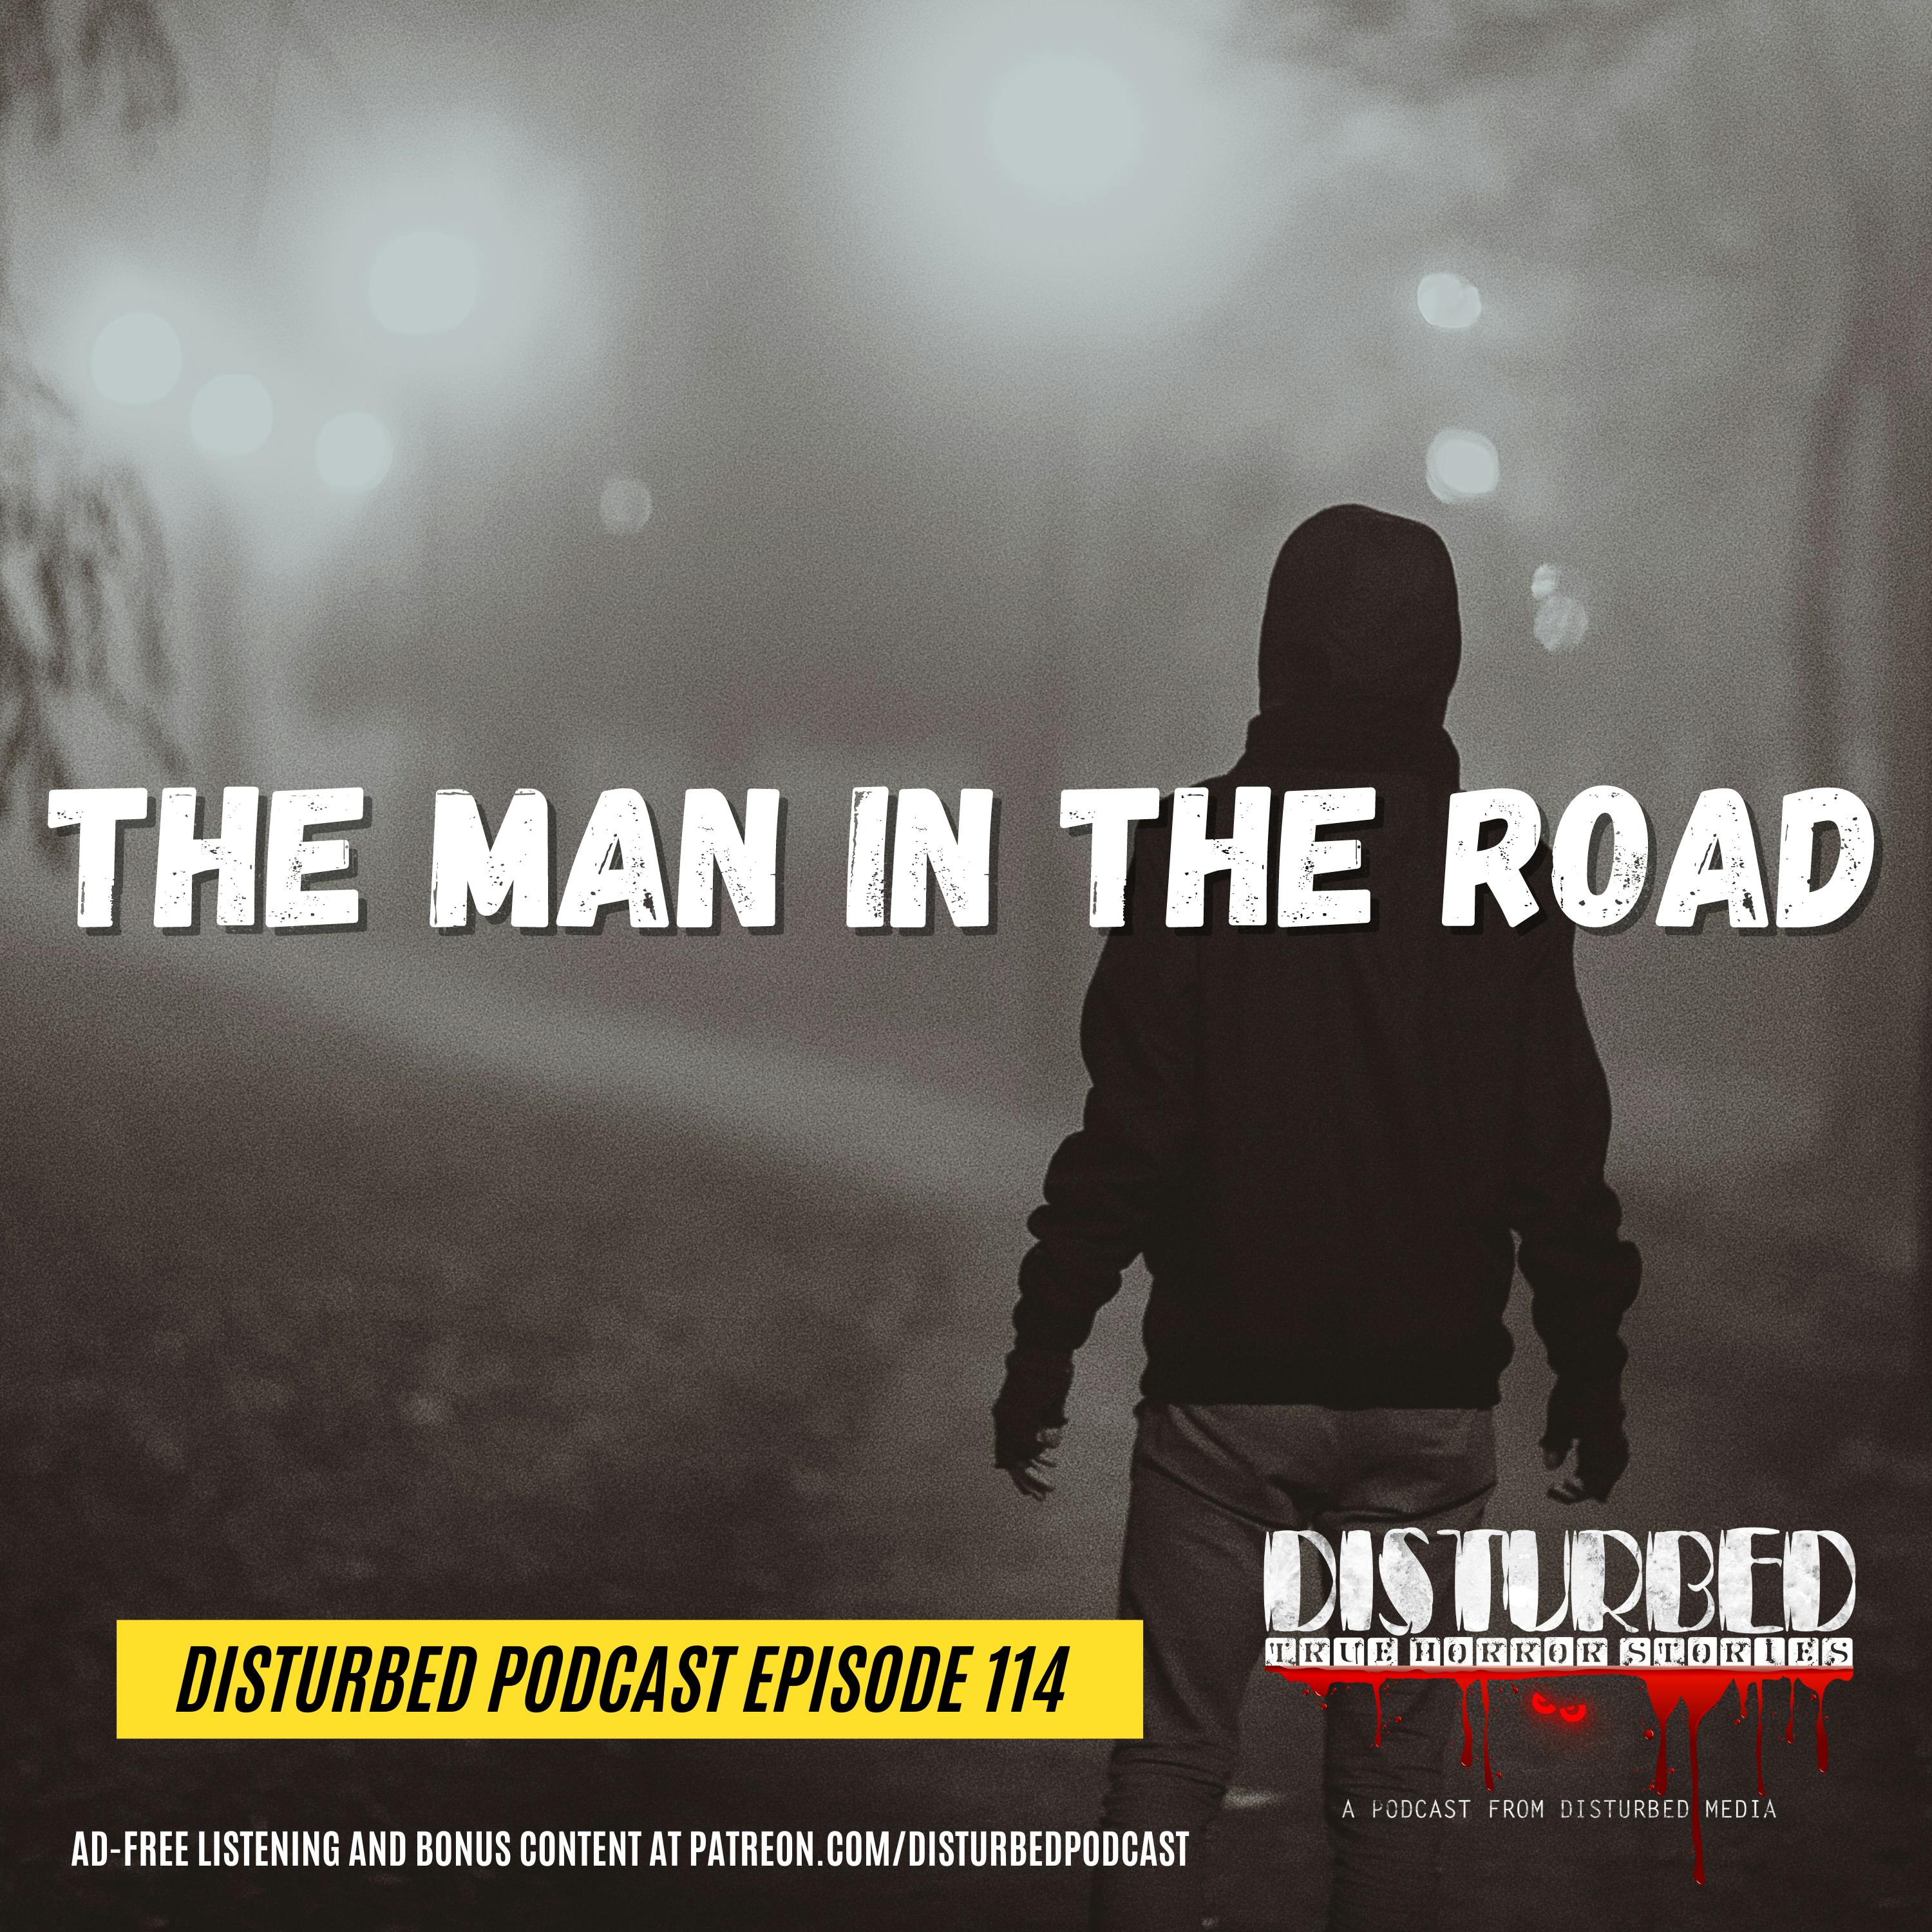 The Man in the Road